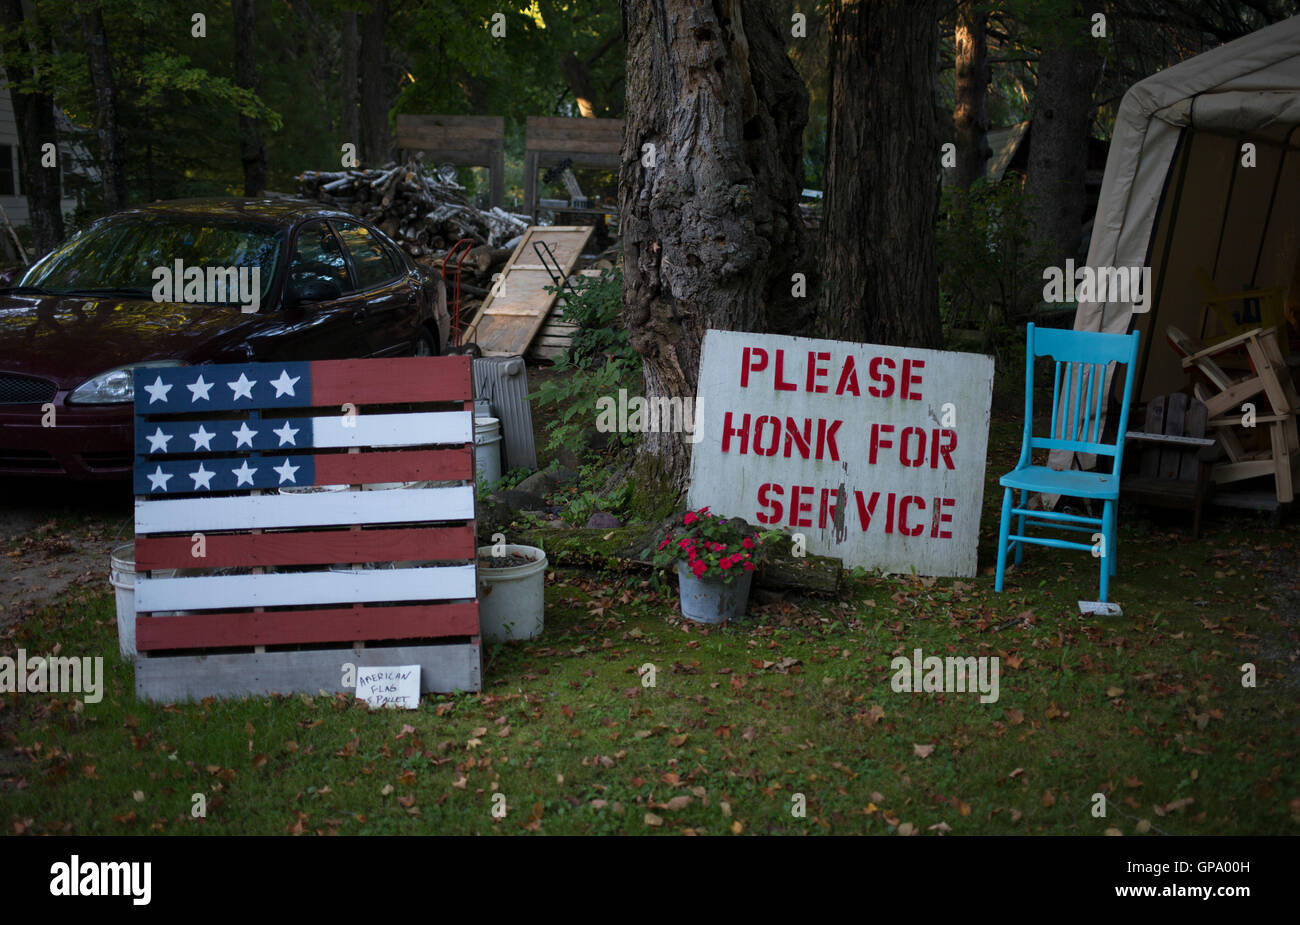 An American Flag and furniture are displayed for sale outside of a workshop on the side of a road near Aitkin, Minnesota, USA Stock Photo